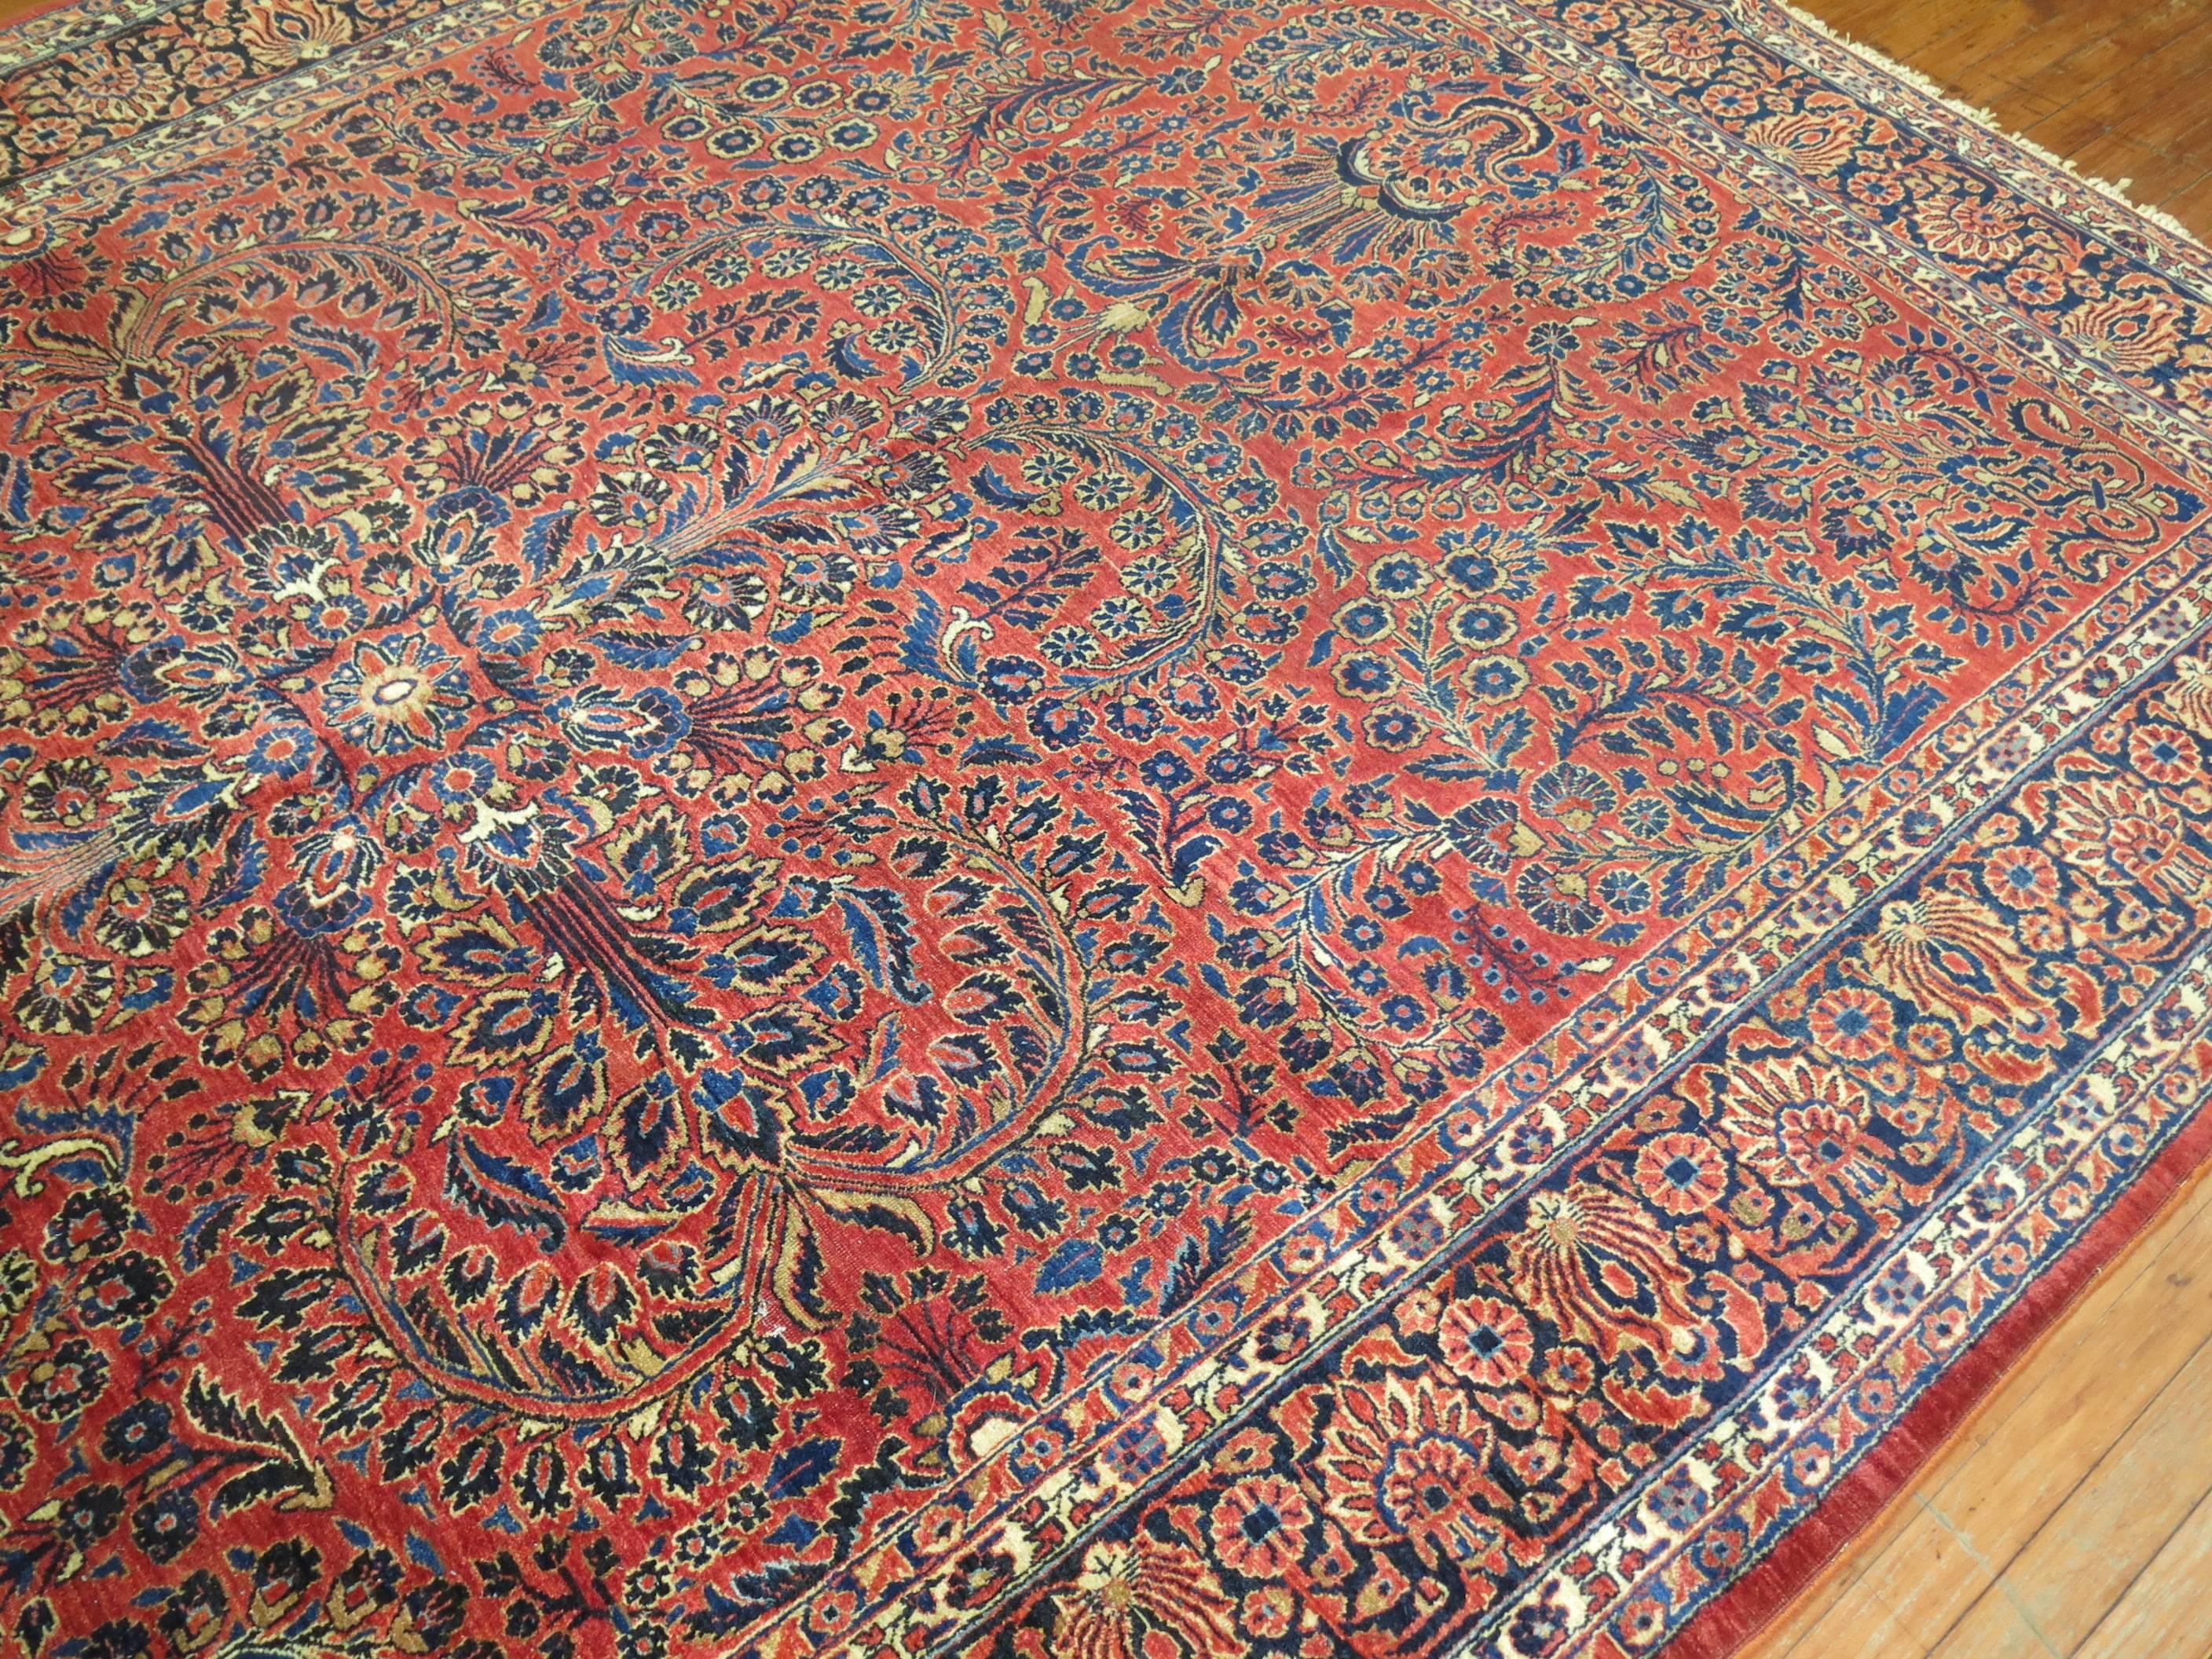 An authentic room size full pile antique Persian Sarouk rug.

Measures: 7'10'' x 11'9''.